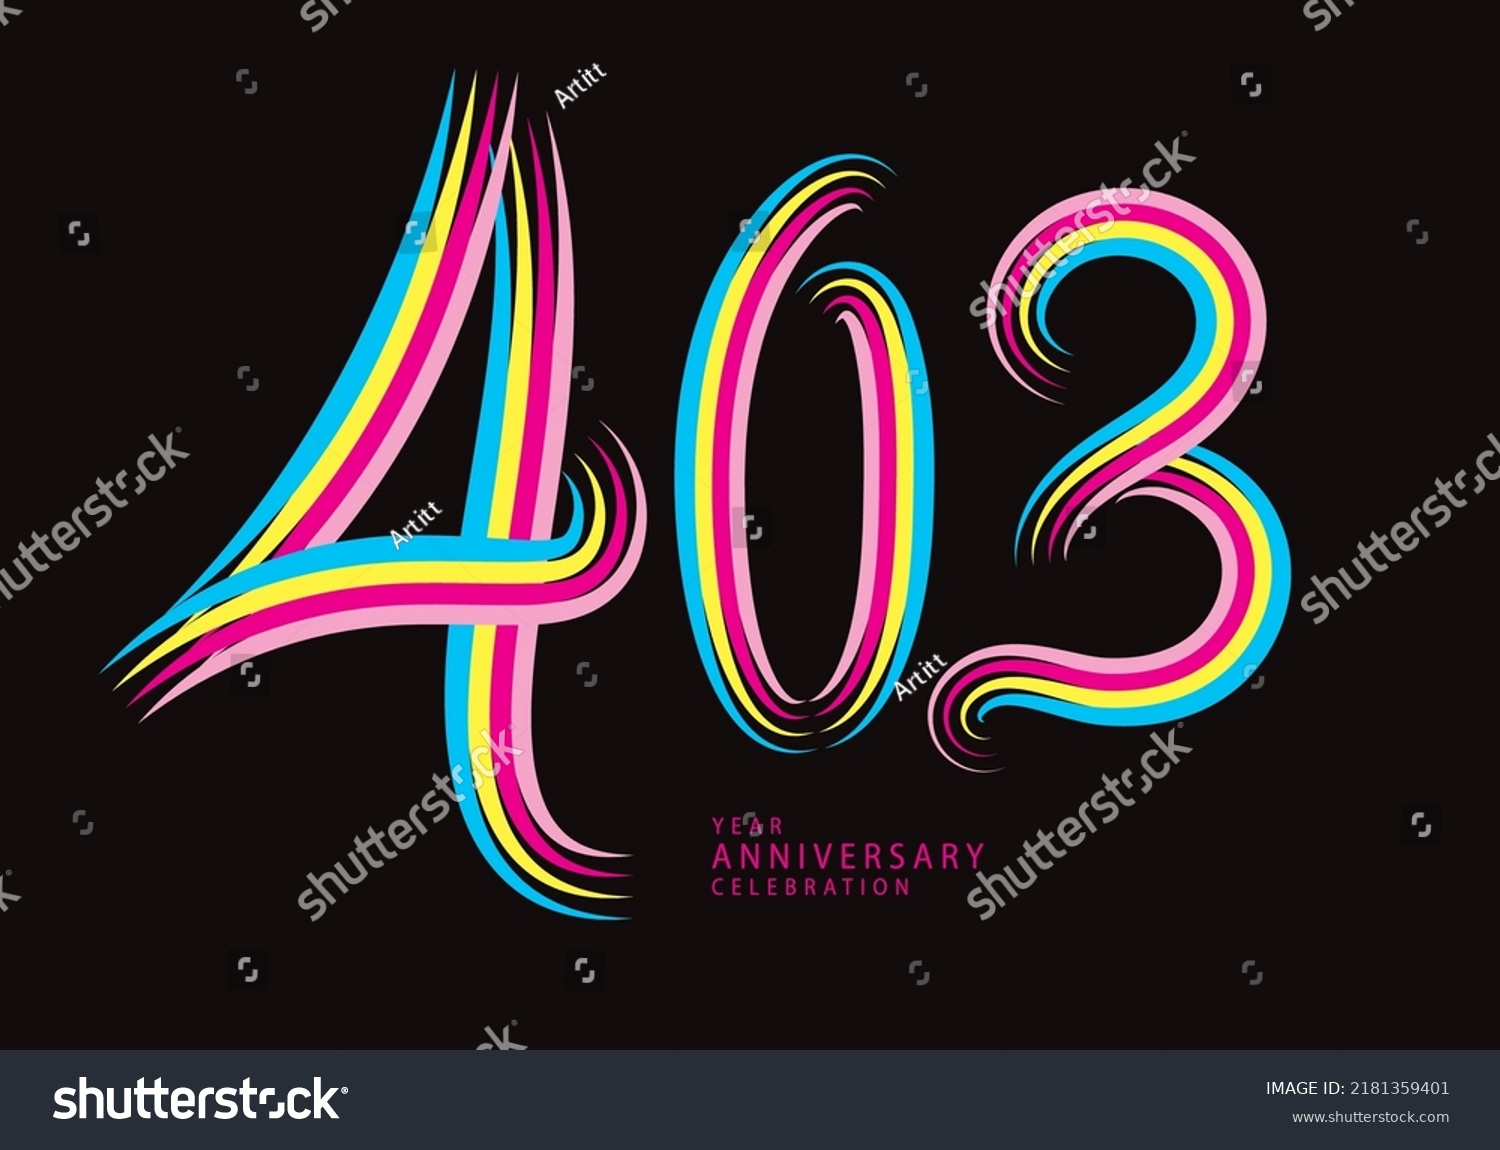 SVG of 403 number design vector, graphic t shirt, 403 years anniversary celebration logotype colorful line,403th birthday logo, Banner template, logo number elements for invitation card, poster, t-shirt. svg